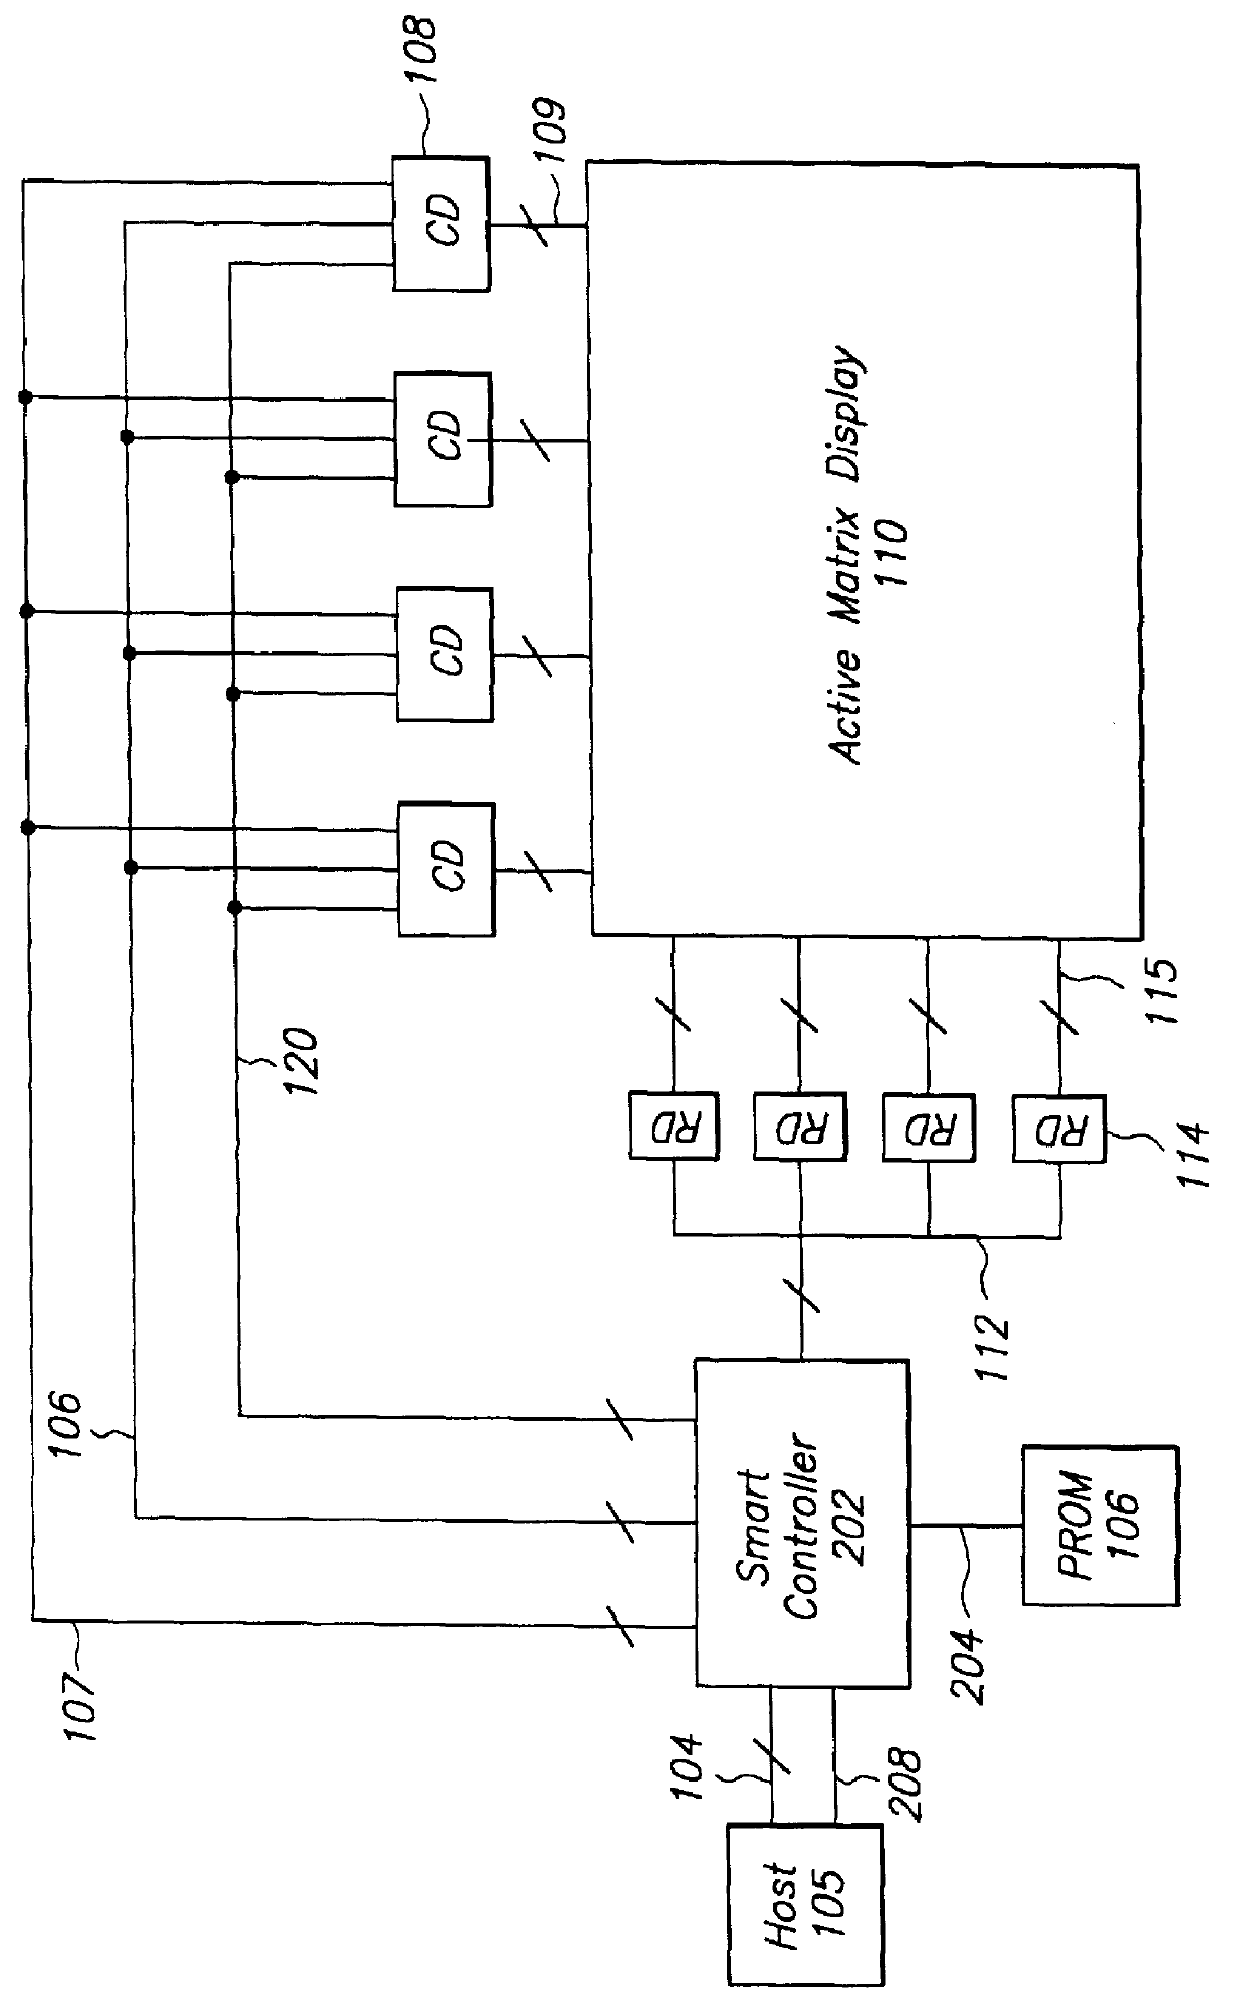 System and method for controlling an active matrix display